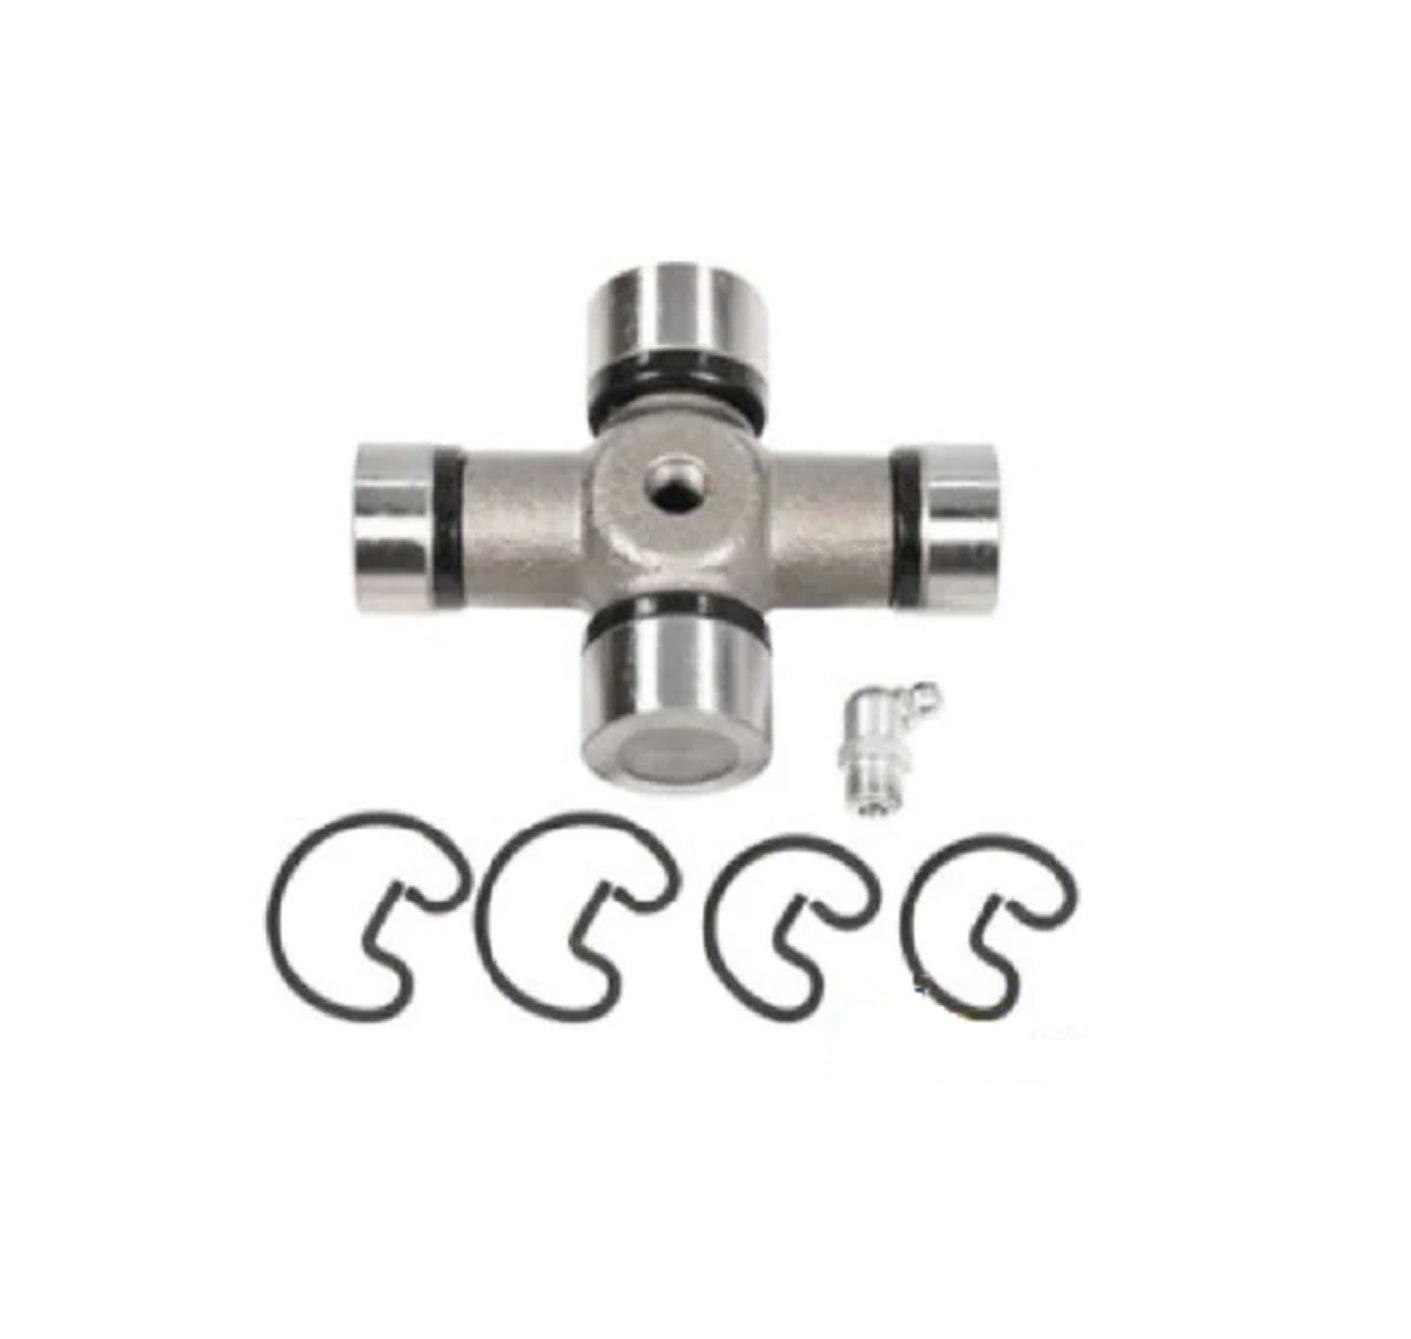 200-5556 Genuine Weasler® Joint Universal Joint Cross And Bearing Kit - ADVANCED TRUCK PARTS